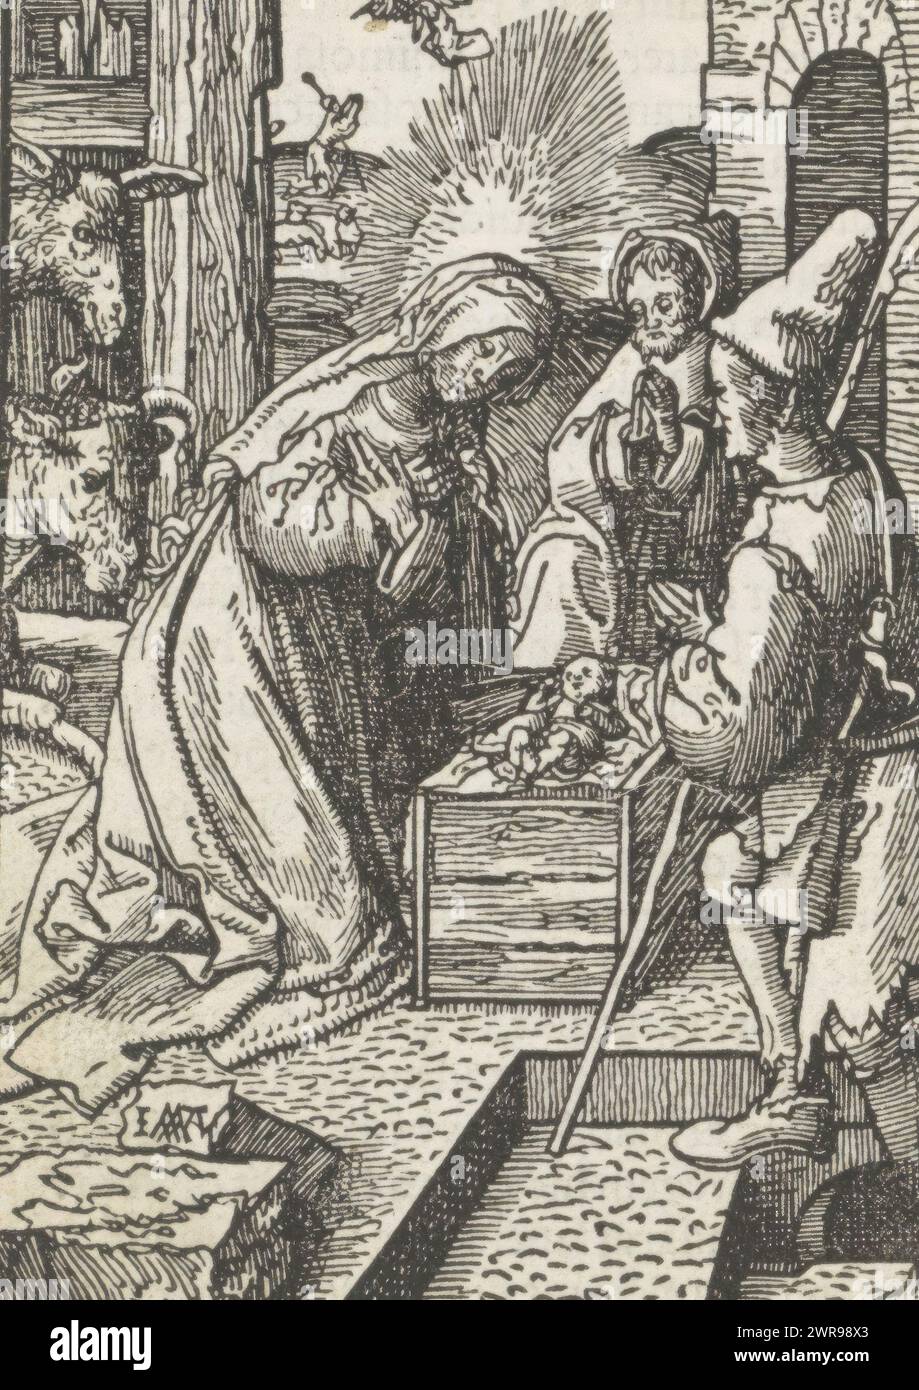 Nativity, The Little Passion (series title), Mary, Joseph and a shepherd kneel around the Christ Child lying in a wooden manger. On the left the donkey and the ox. In the background the announcement to the shepherds. Print is part of a book., print maker: Jacob Cornelisz van Oostsanen, publisher: Doen Pietersz., Amsterdam, 1523, paper, height 113 mm × width 79 mm, height 141 mm × width 98 mm, print Stock Photo